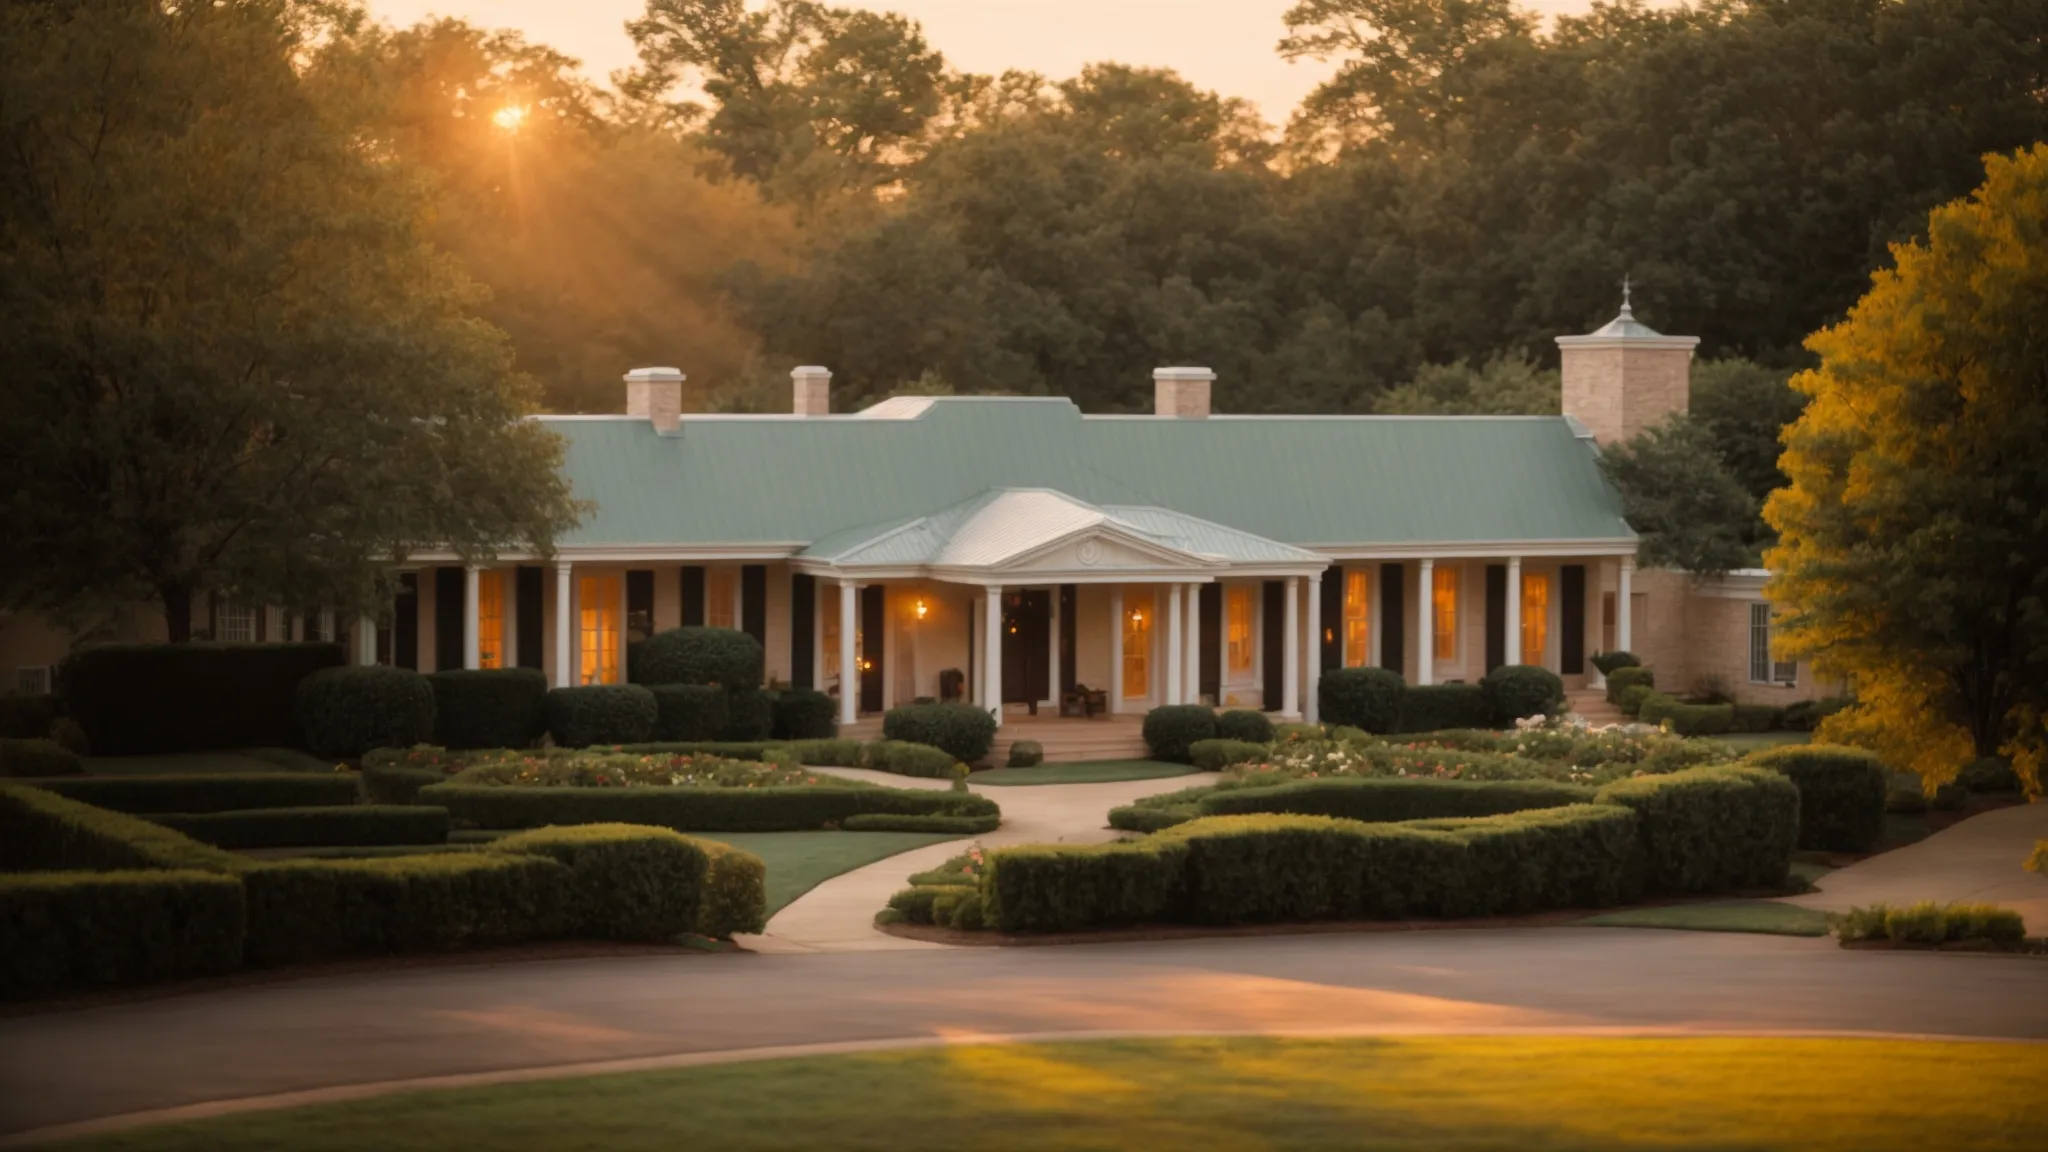 elvis presley's graceland, a grand estate bathed in the warm glow of sunset, symbolizes his enduring legacy.